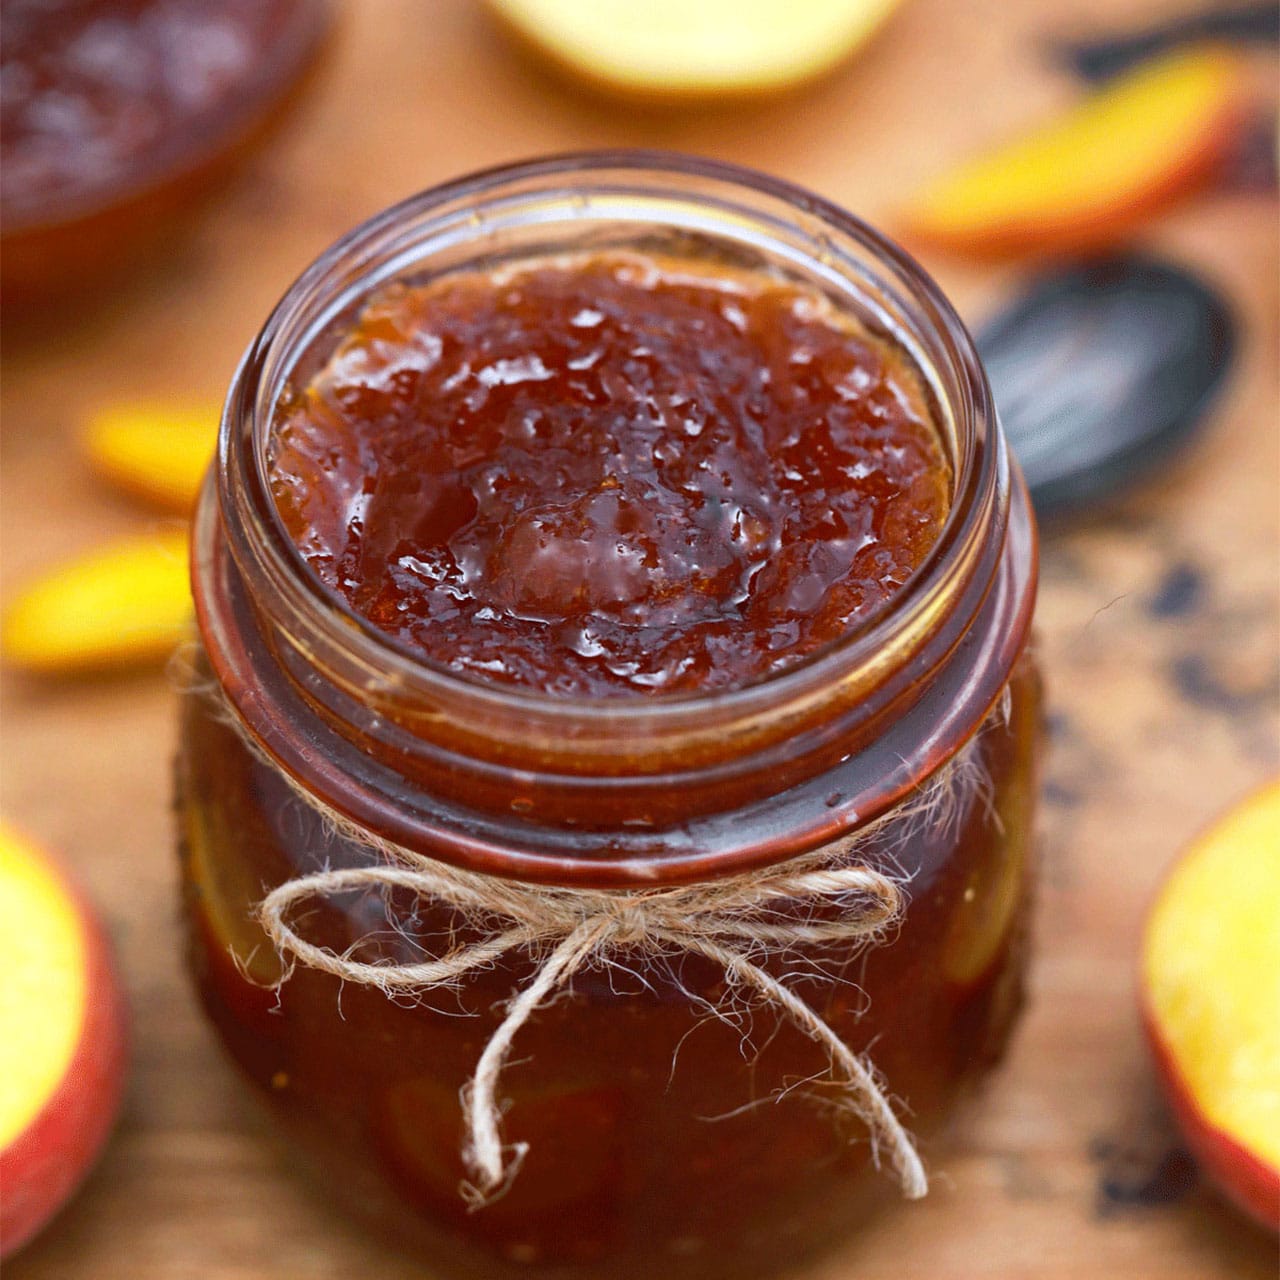 Best Peach Jam Recipe [Video] - Sweet and Savory Meals